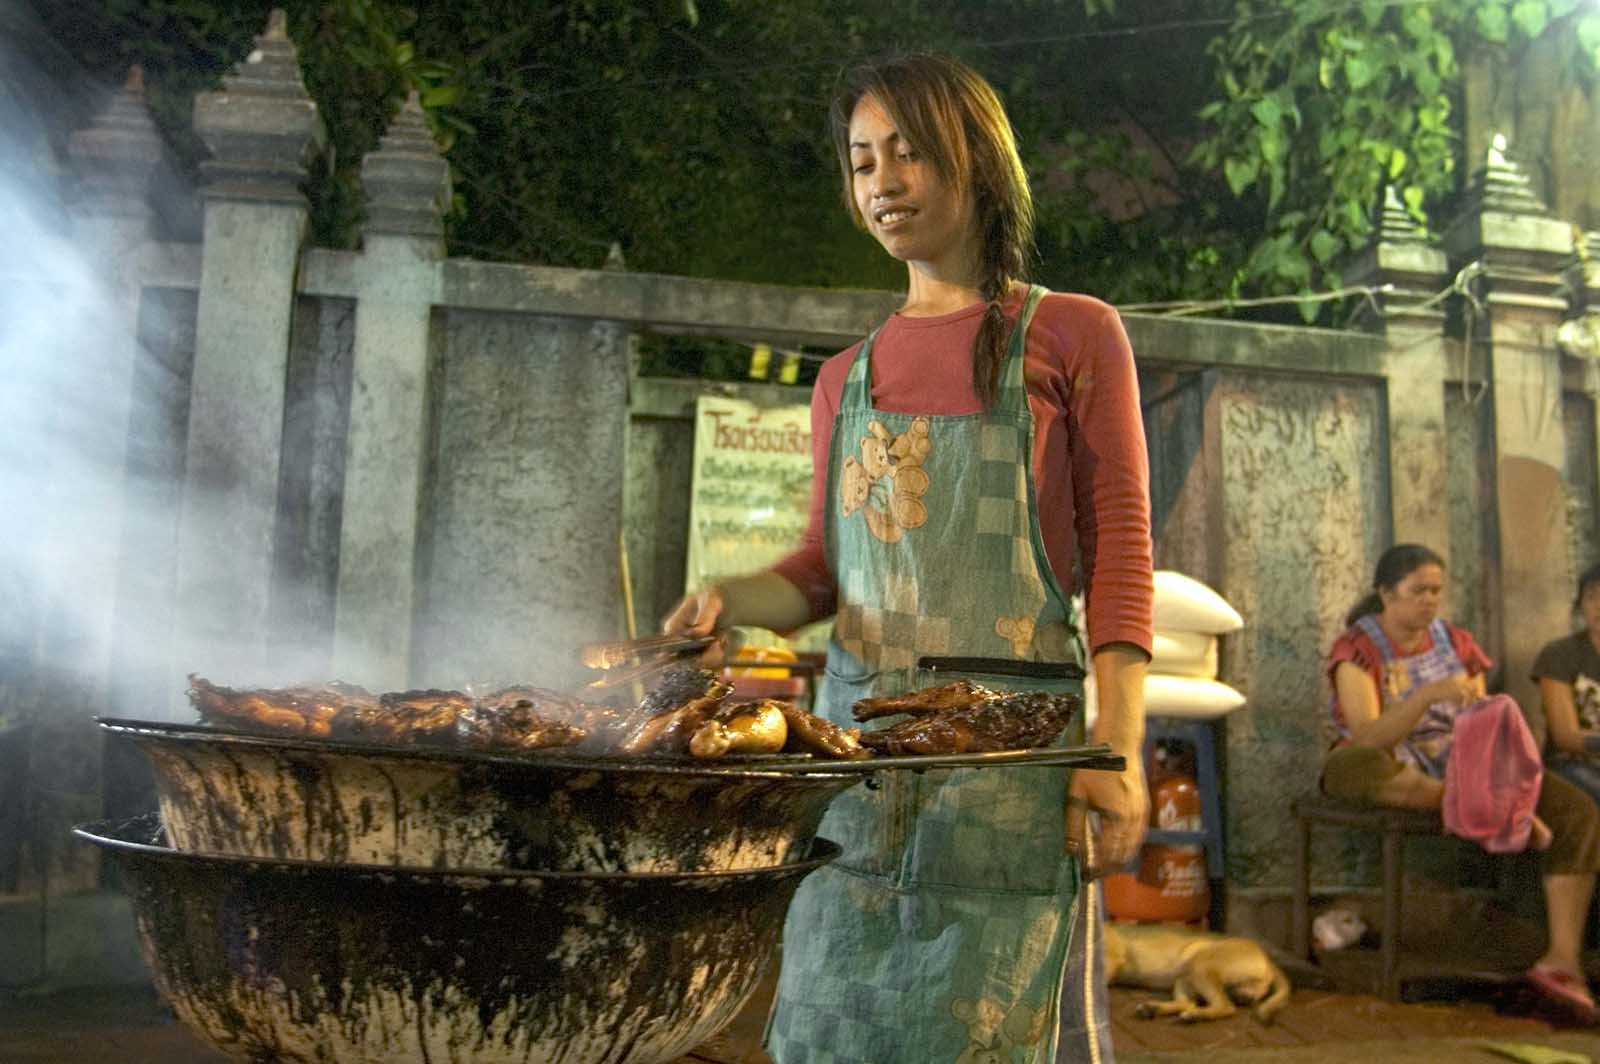 Grilling food on the streets of Bangkok, Thailand